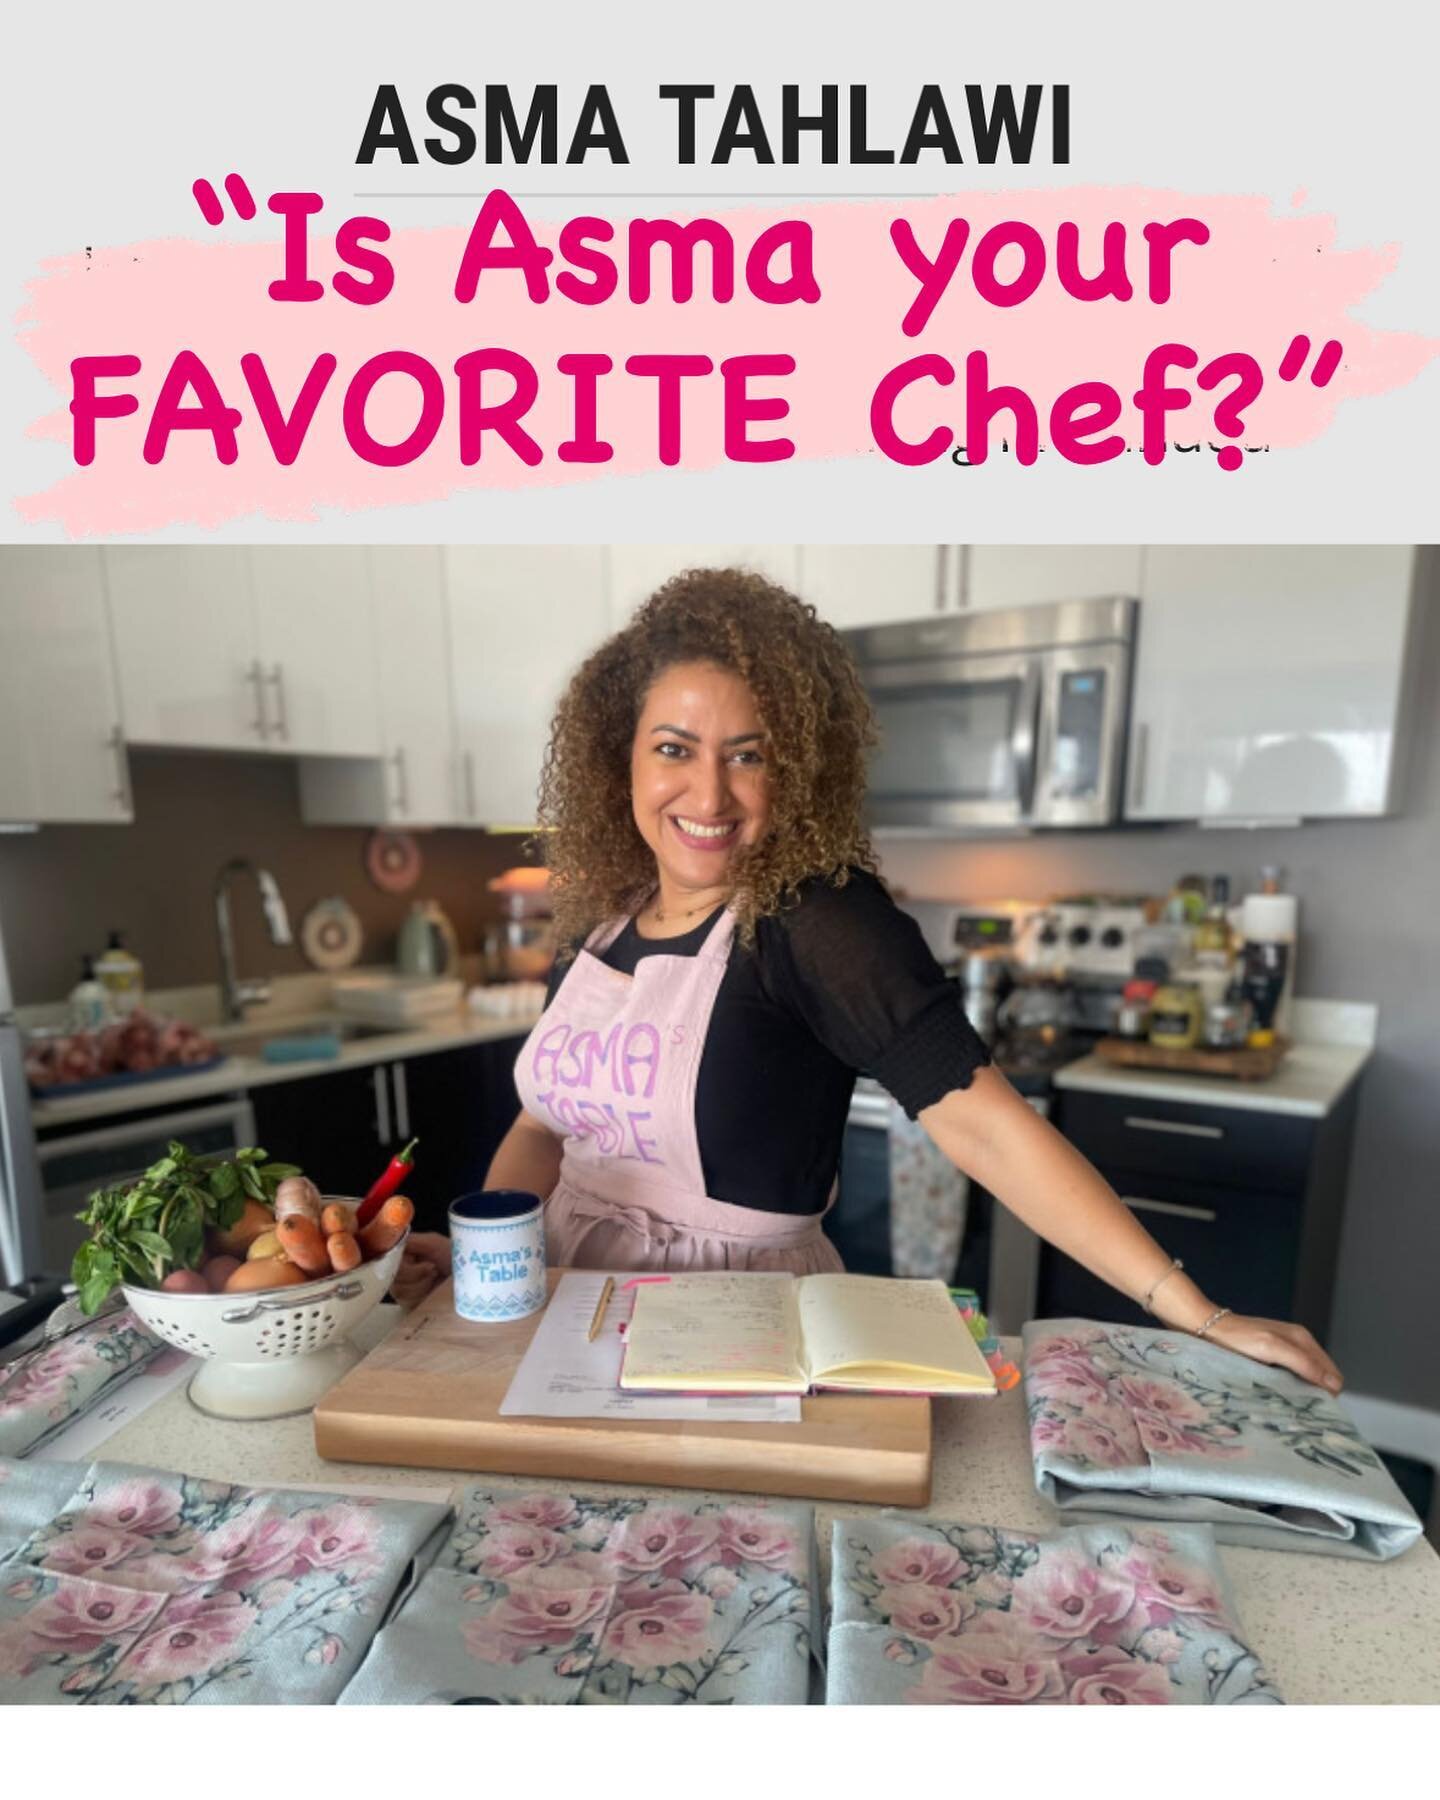 Hey everyone! I&rsquo;ve joined the Favorite Chef competition hoping to win an exclusive cooking experience with Chef Carla Hall😍 Please vote for me! 👩🏽&zwj;🍳 your support is very much appreciated and helps me get closer to the goal❤️ thank you i